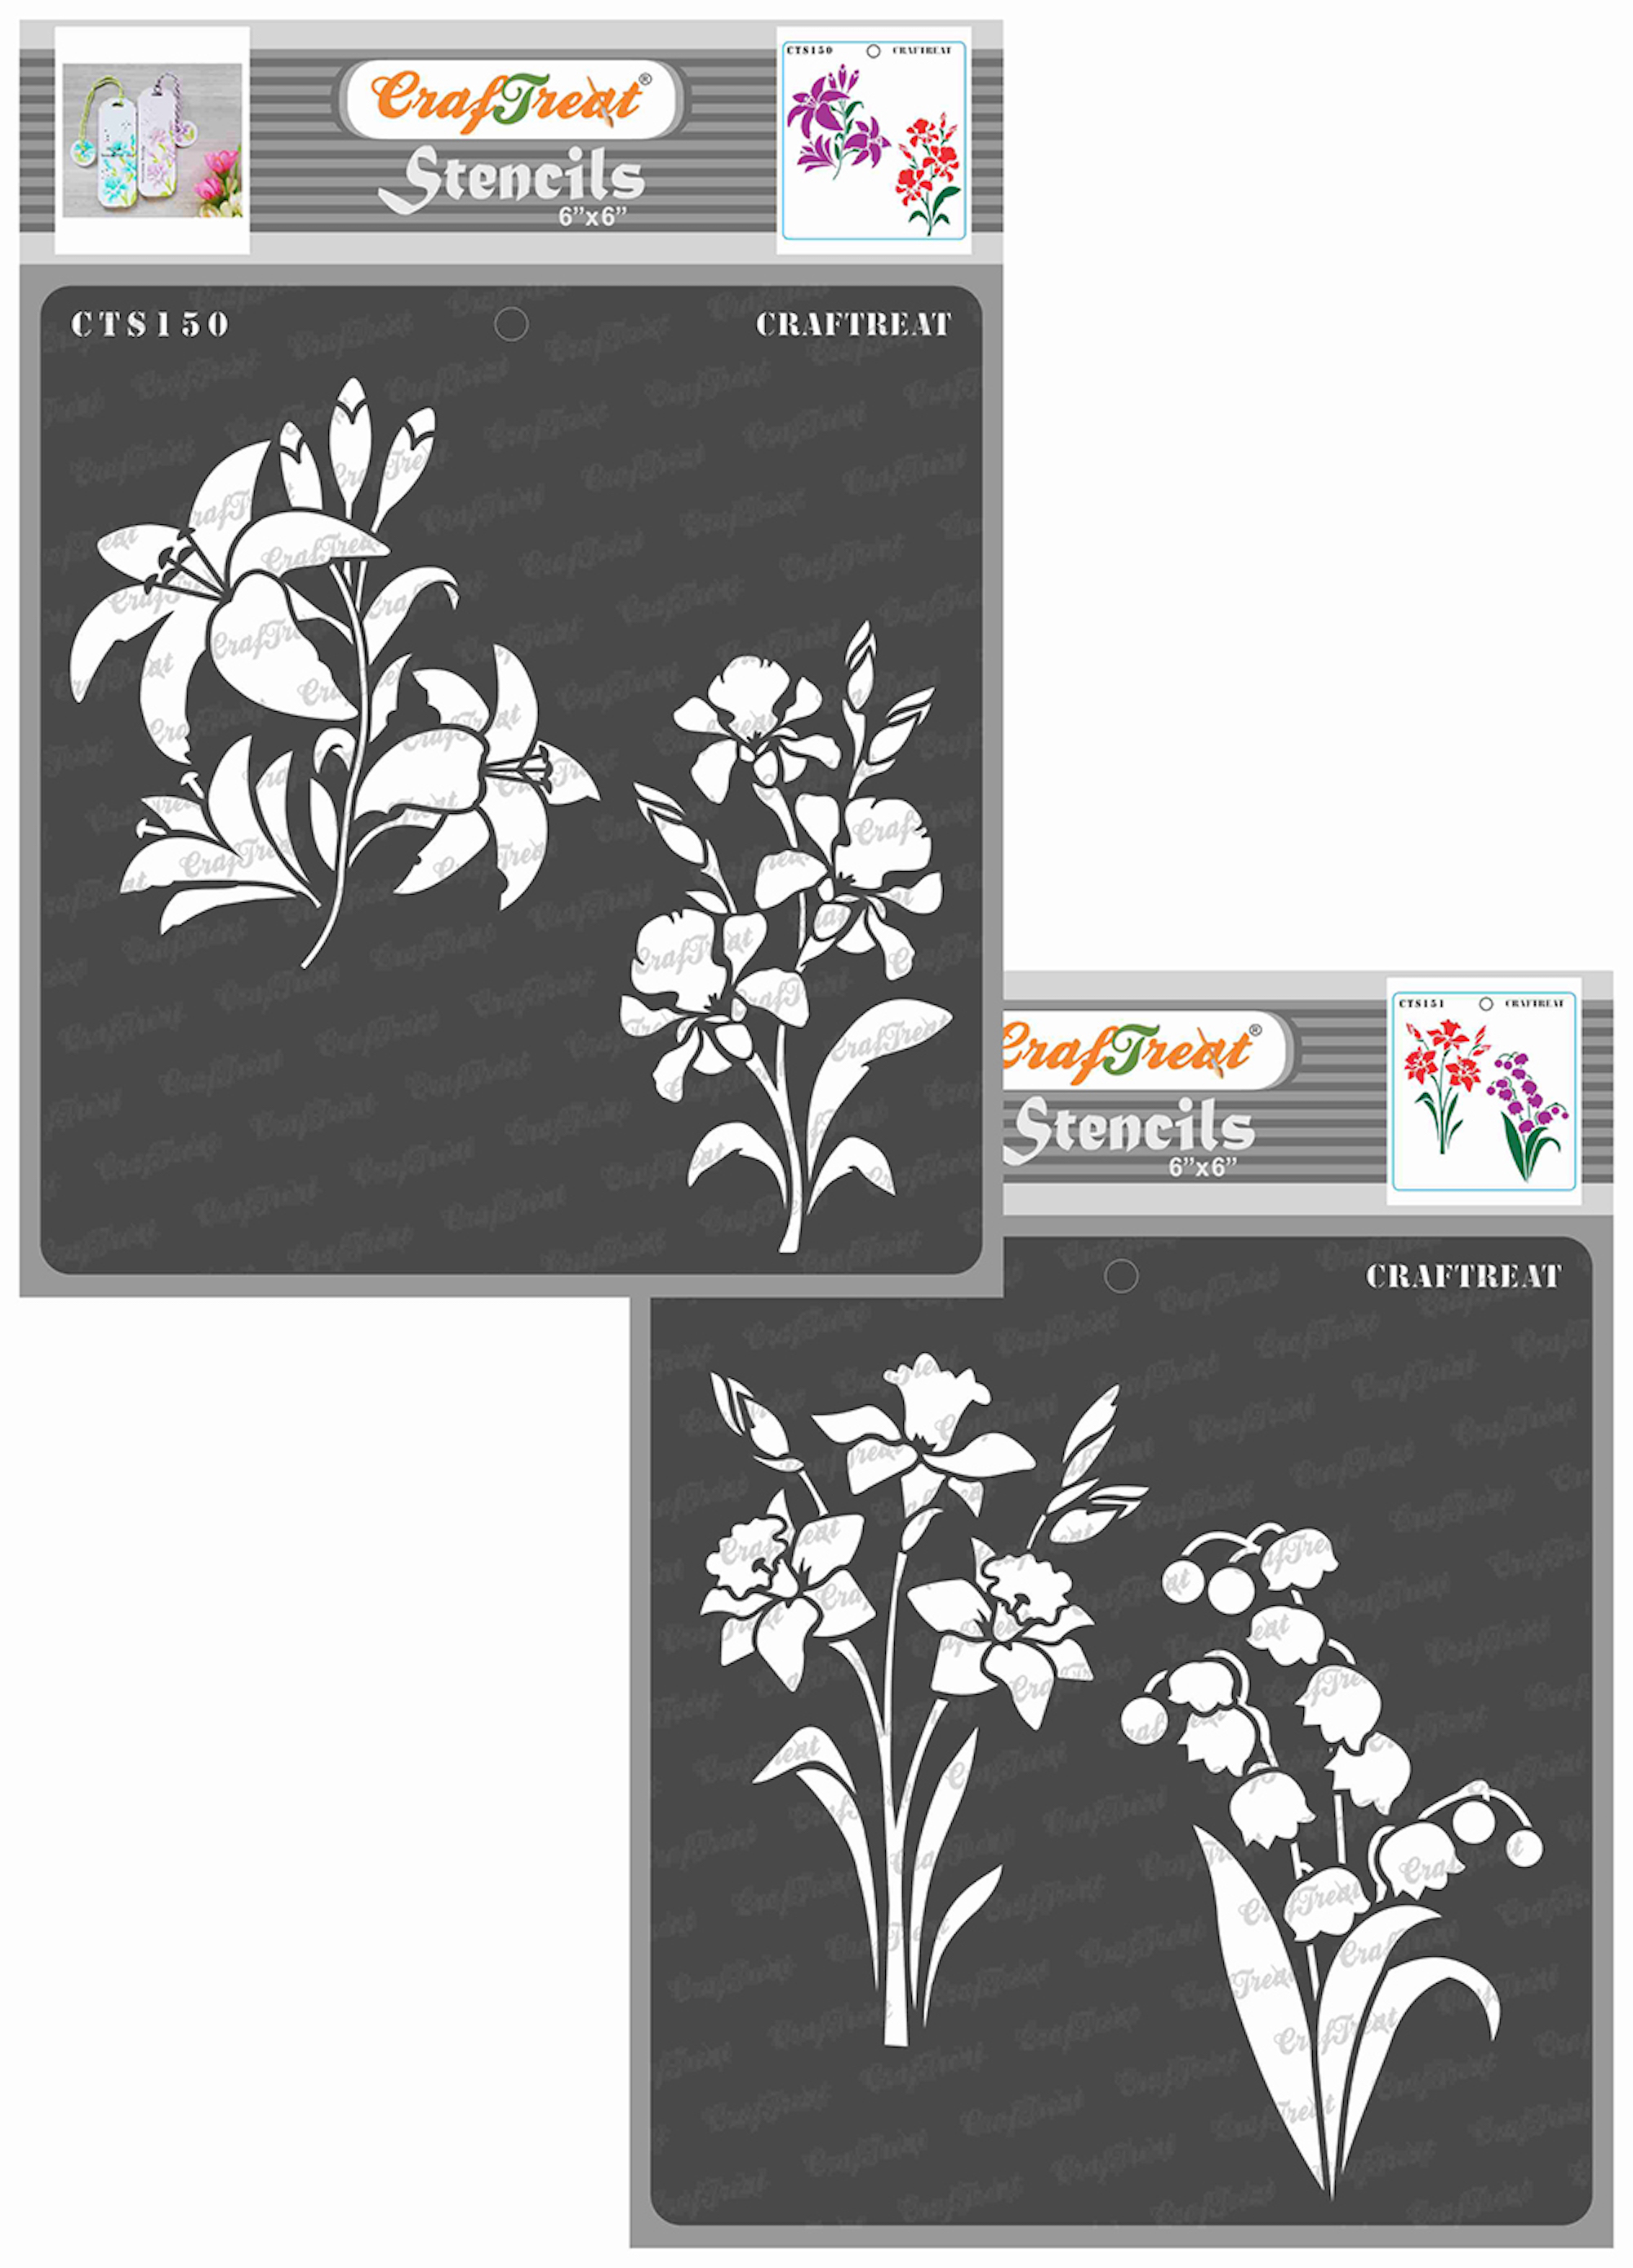 CrafTreat Lily Iris Daffodil and Bell Flower Stencils for Painting - 2 Pcs  - 6x6 Each 